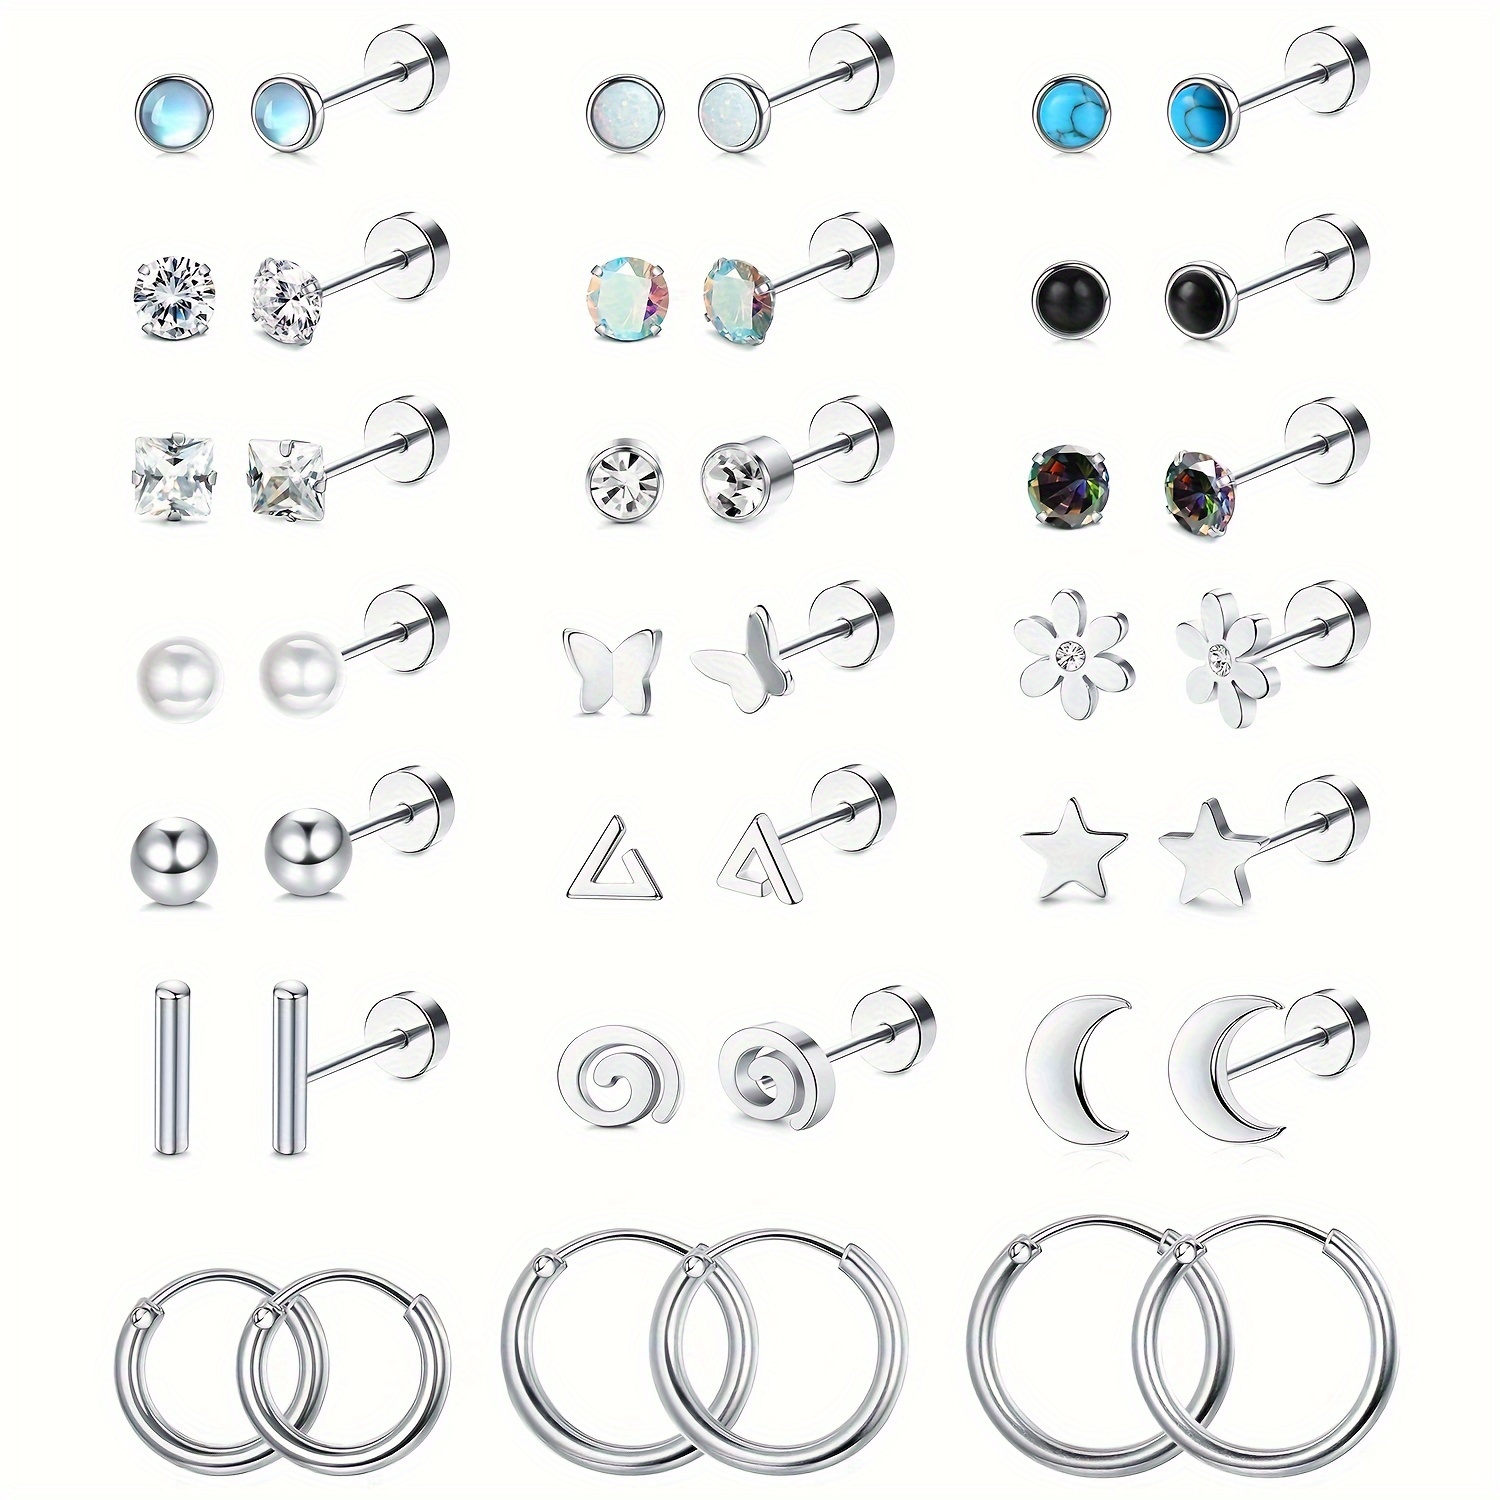 

21pairs Surgical Steel Flat Back Earrings Hypoallergenic Small Tiny Stud Earrings 20g Screw Back Nap Stack Cartilage Earring Stacks